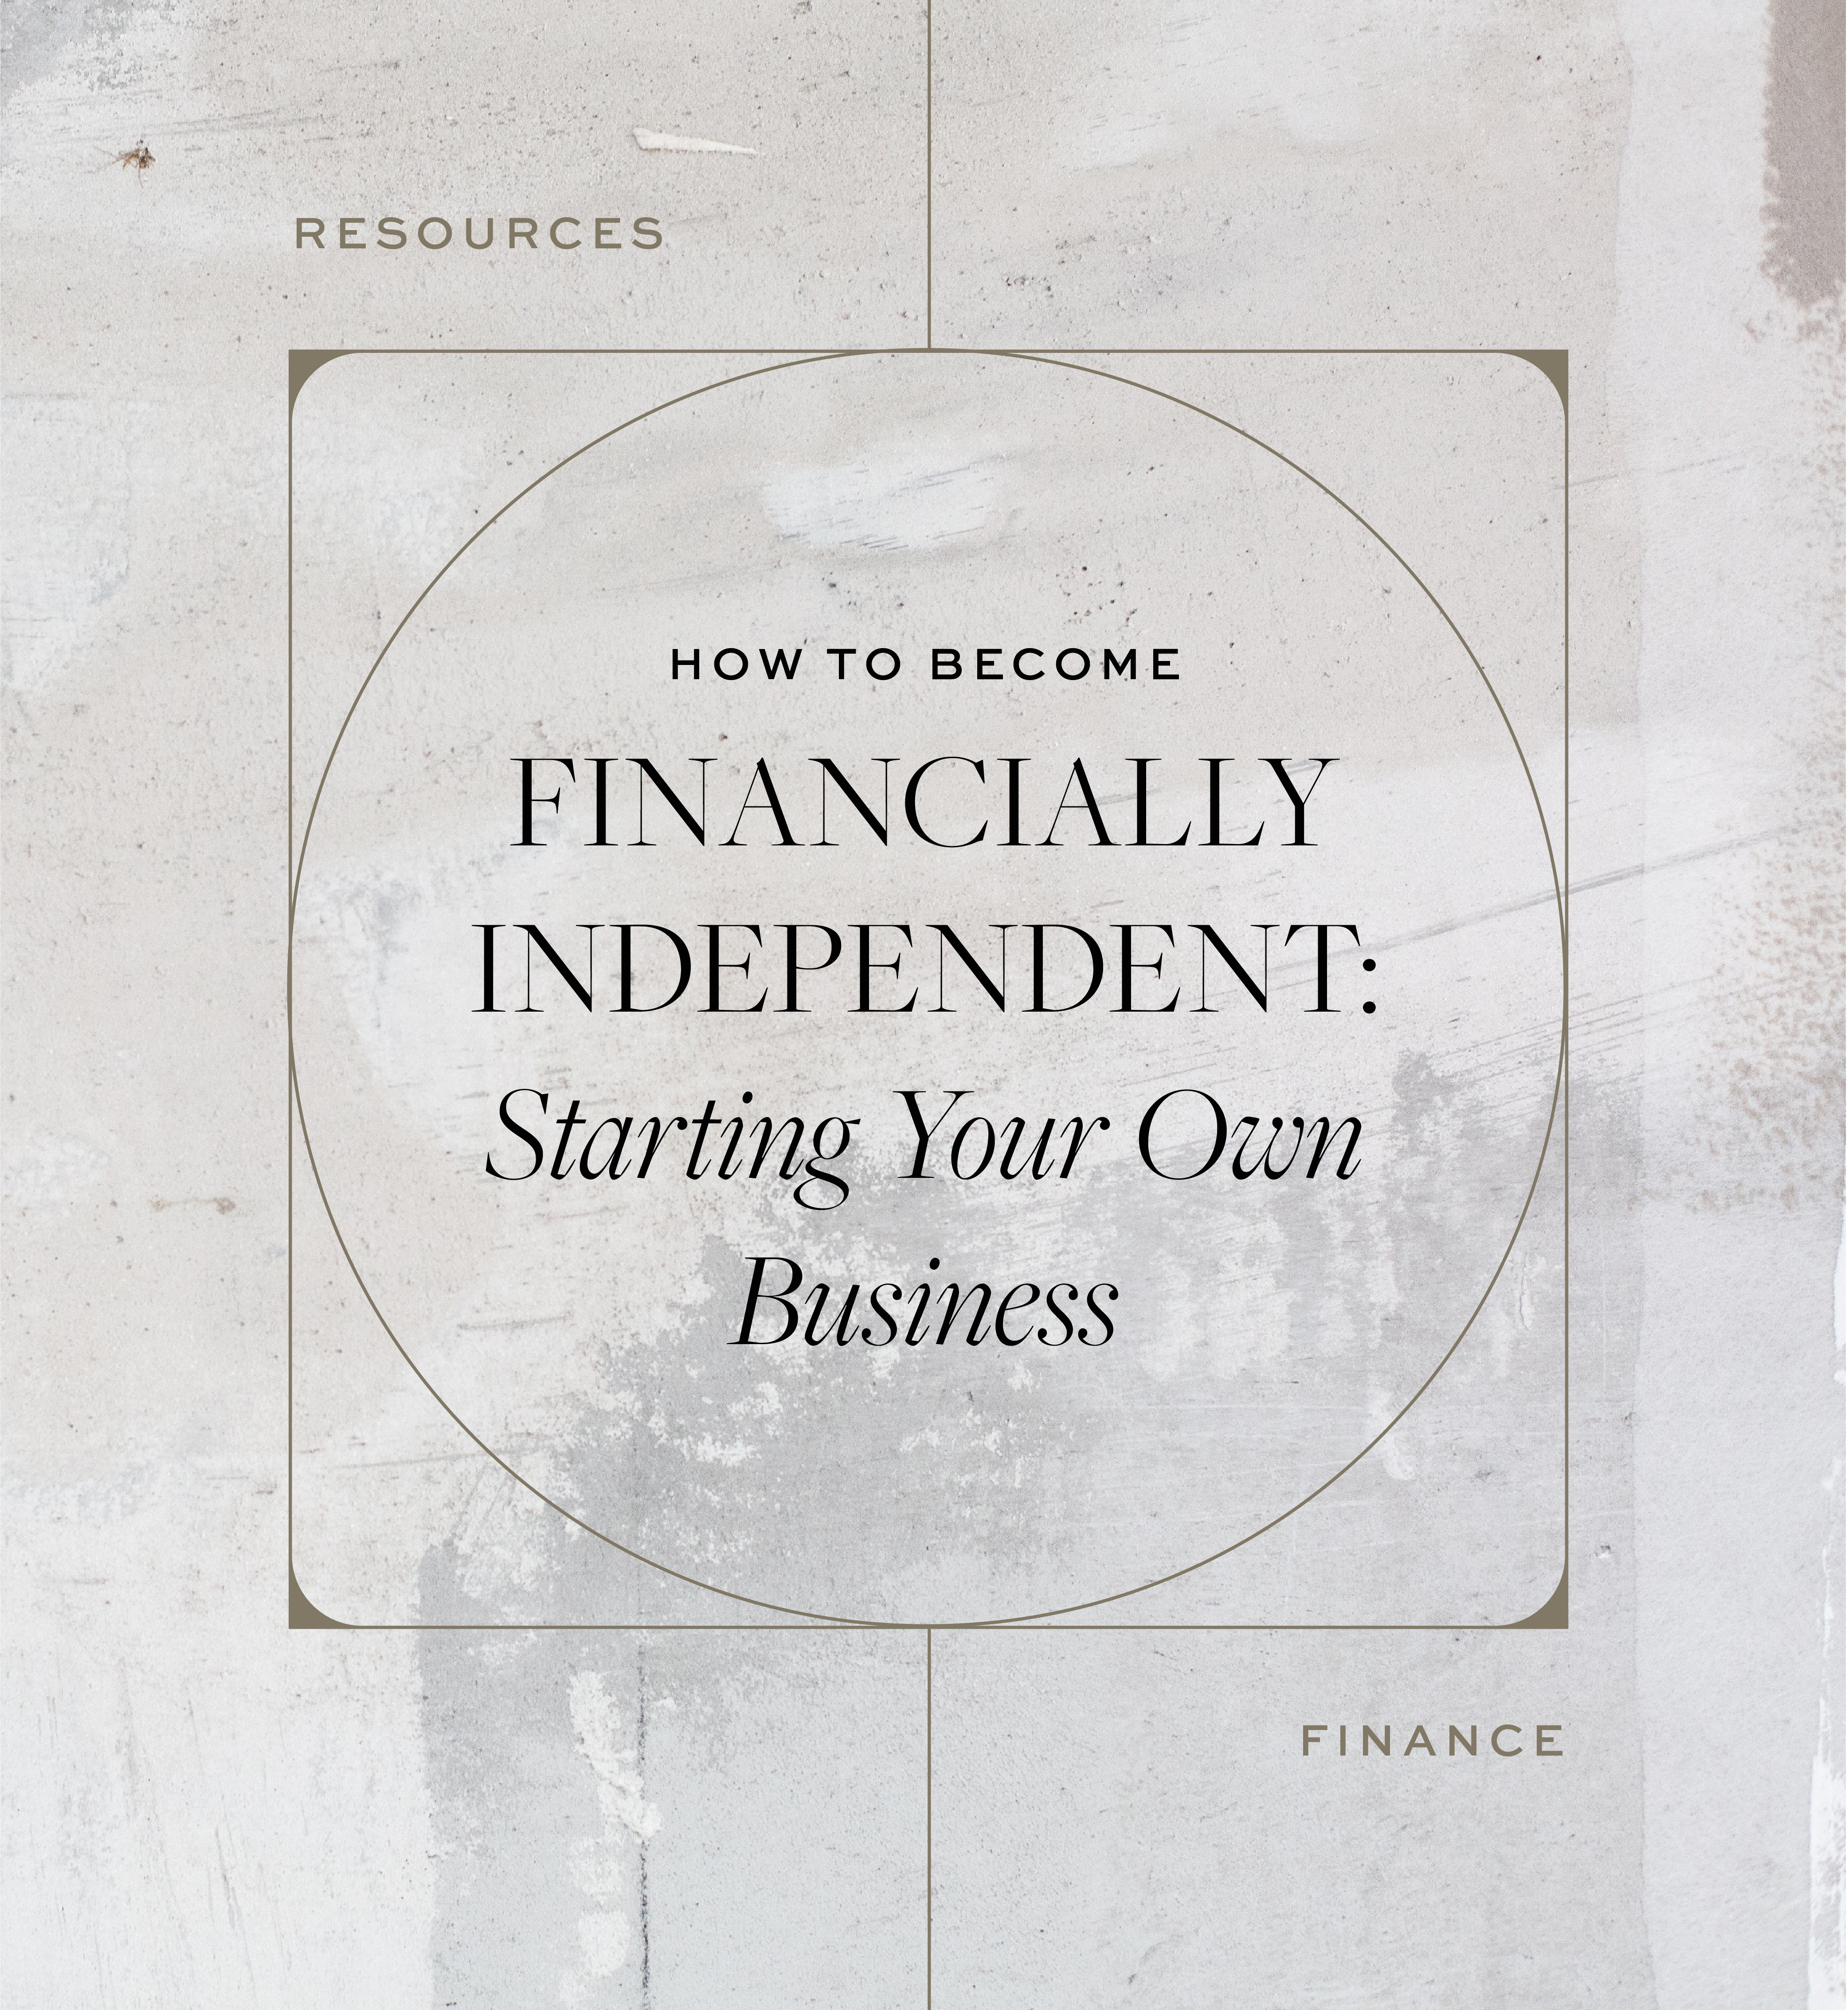 How to become financially independent: starting your own business.